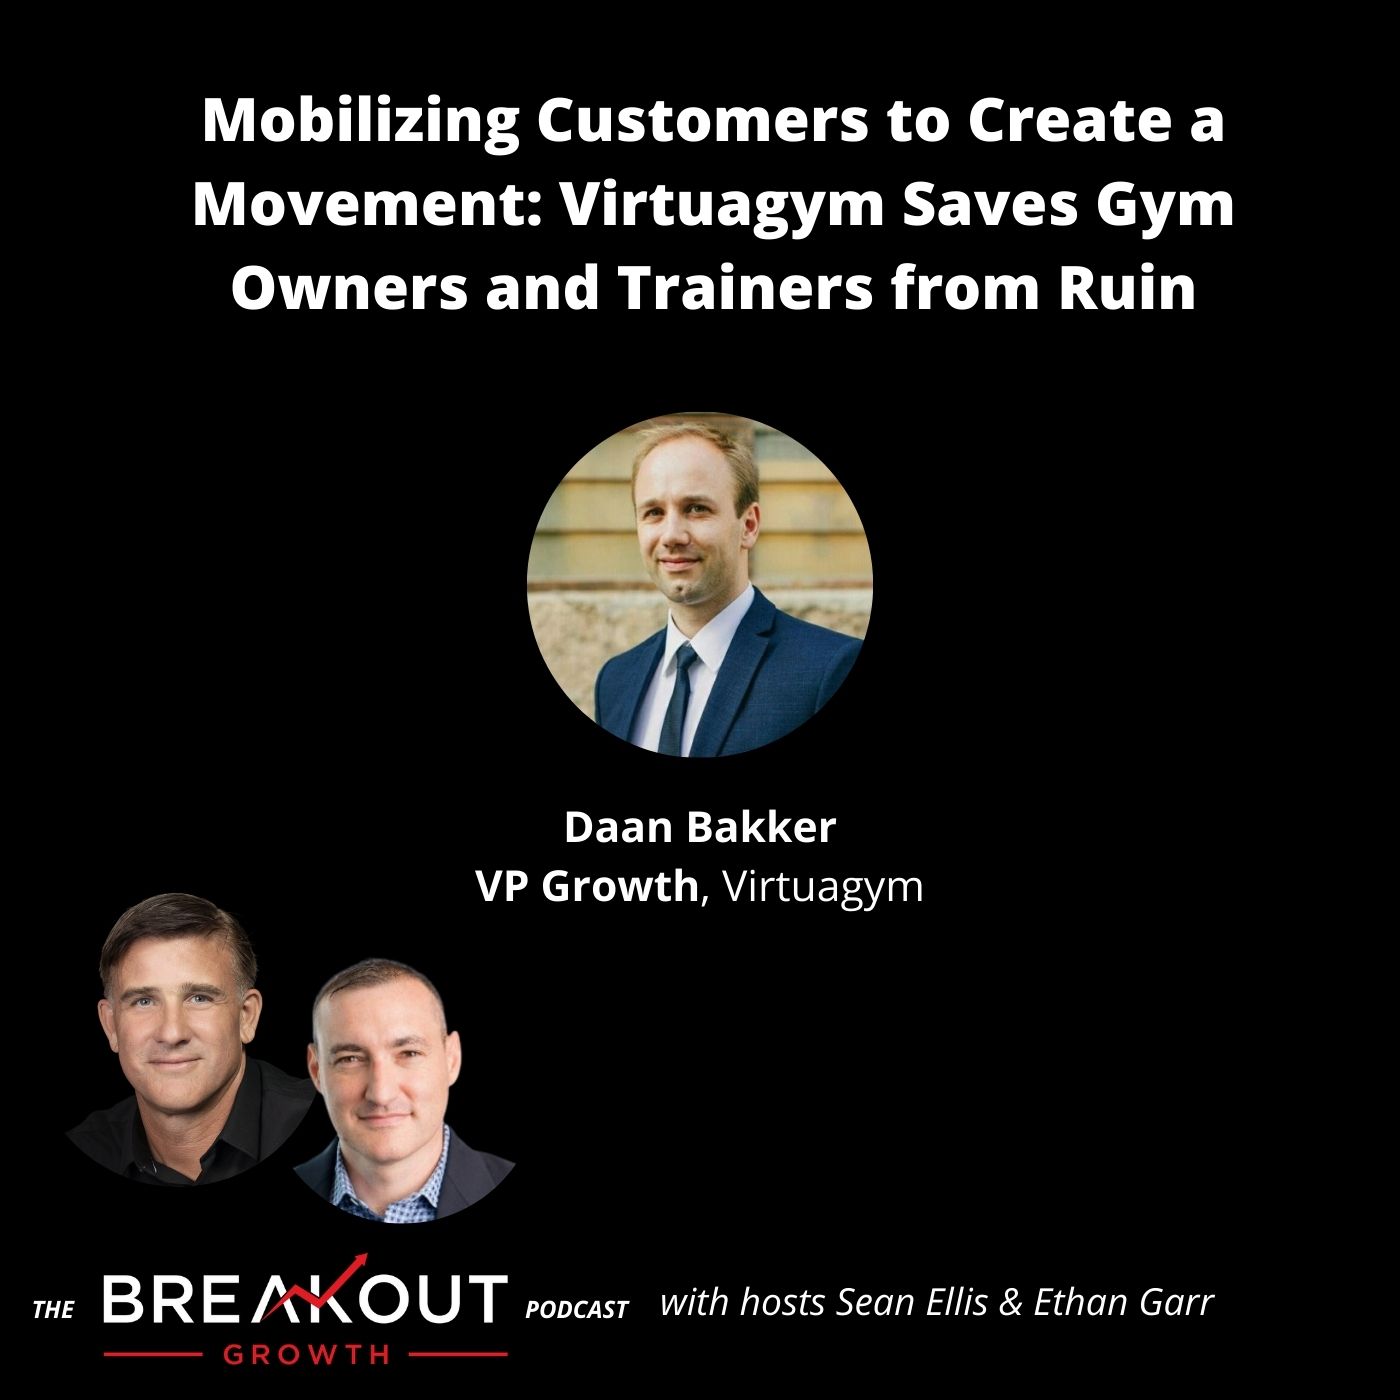 Mobilizing Customers to Create a Movement: Virtuagym Saves Gym Owners and Trainers from Ruin